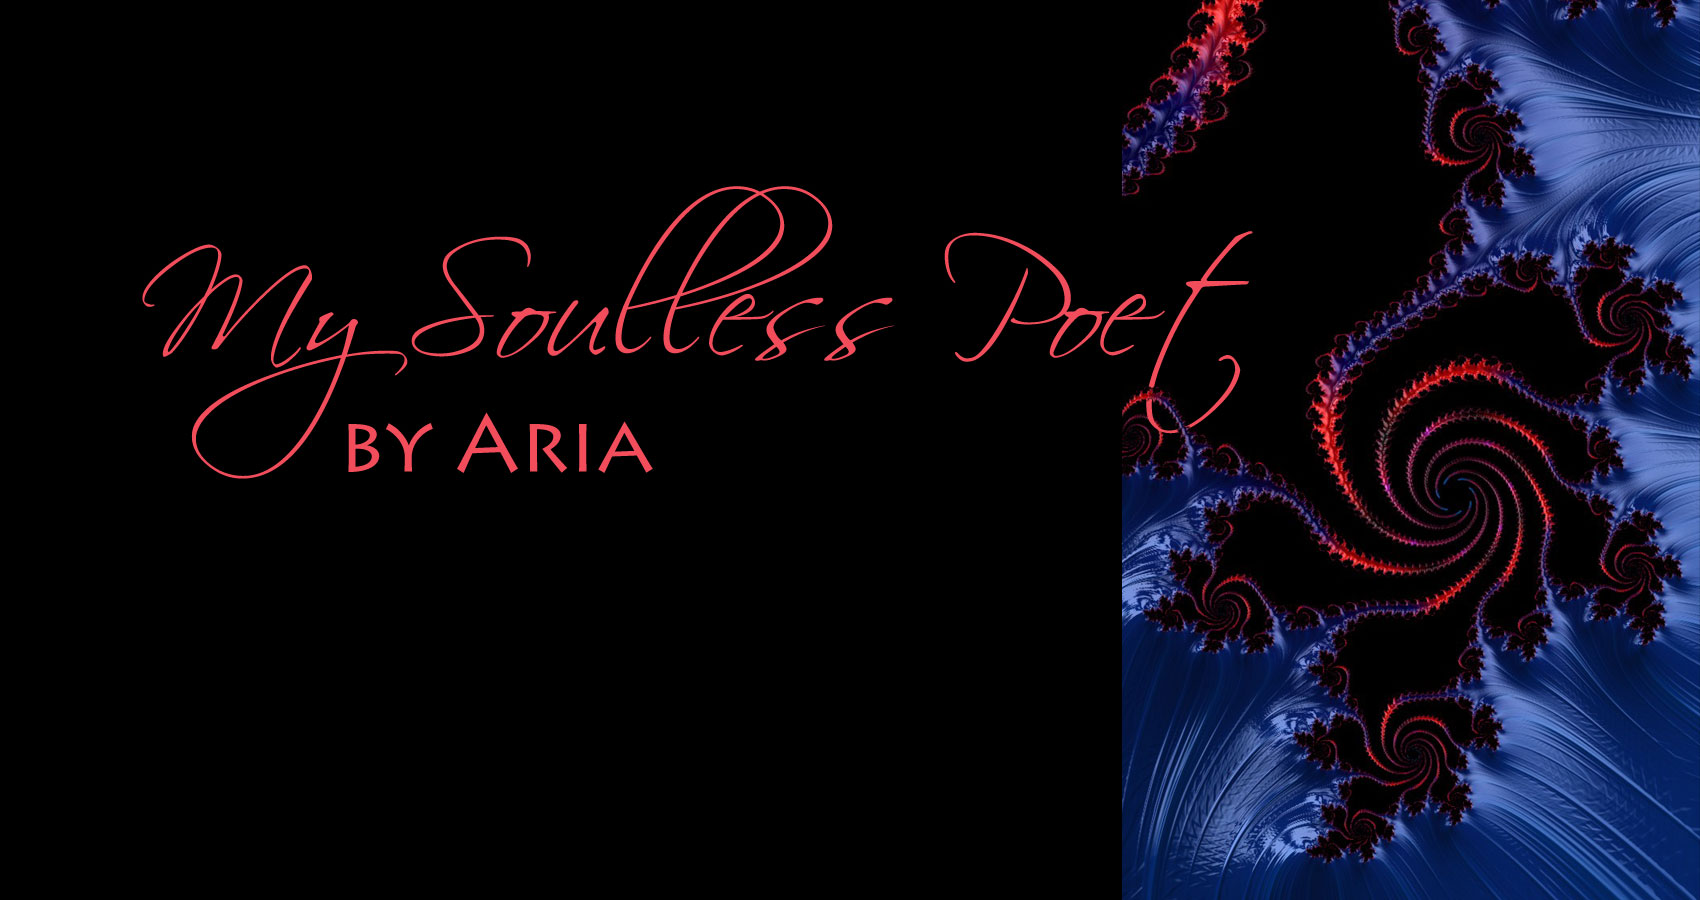 My Soulless Poet written by Aria at Spillwords.com